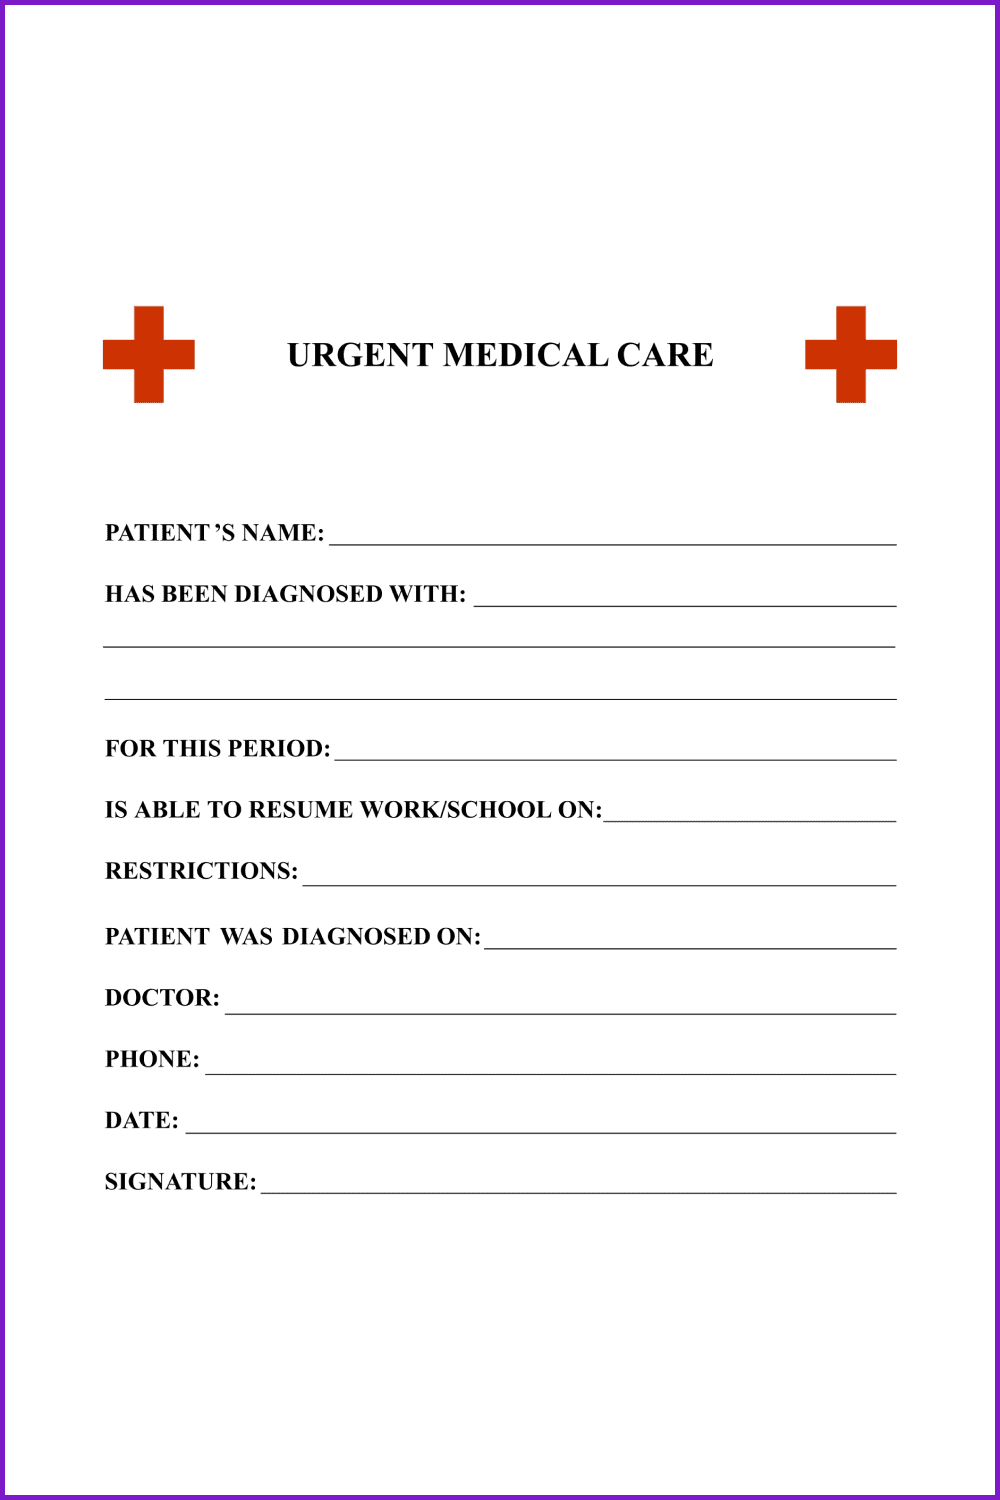 Printable Urgent Care Doctor’s Note Templates.